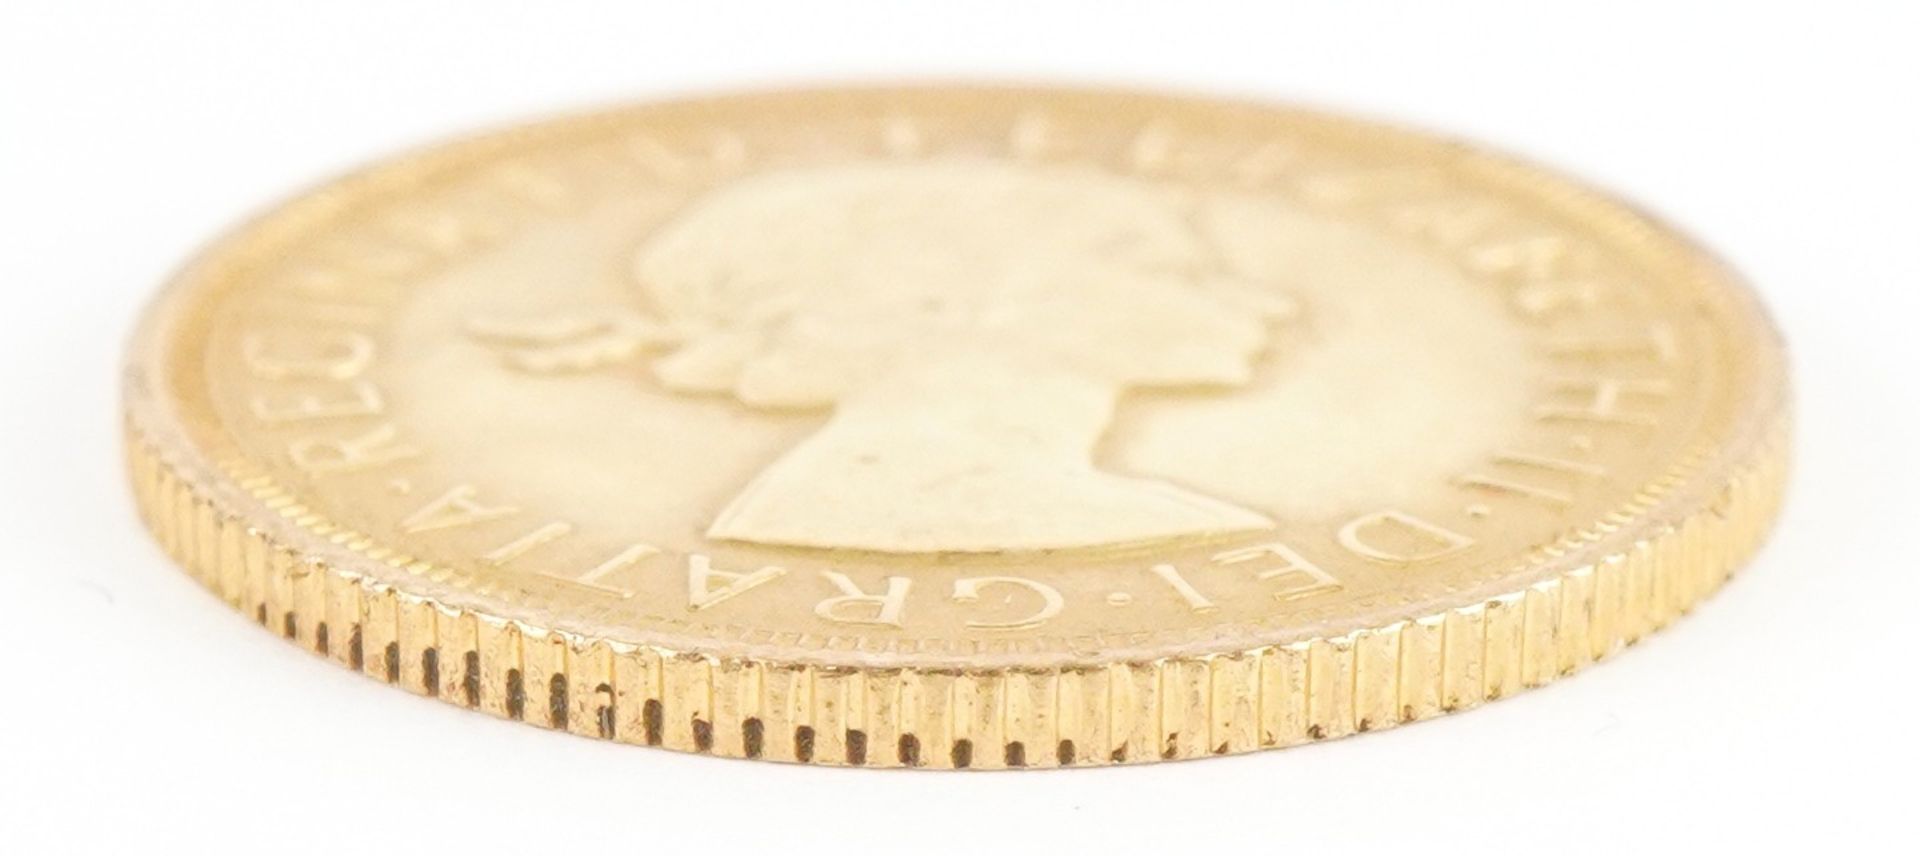 Elizabeth II 1968 gold sovereign : For further information on this lot please visit www. - Image 3 of 3